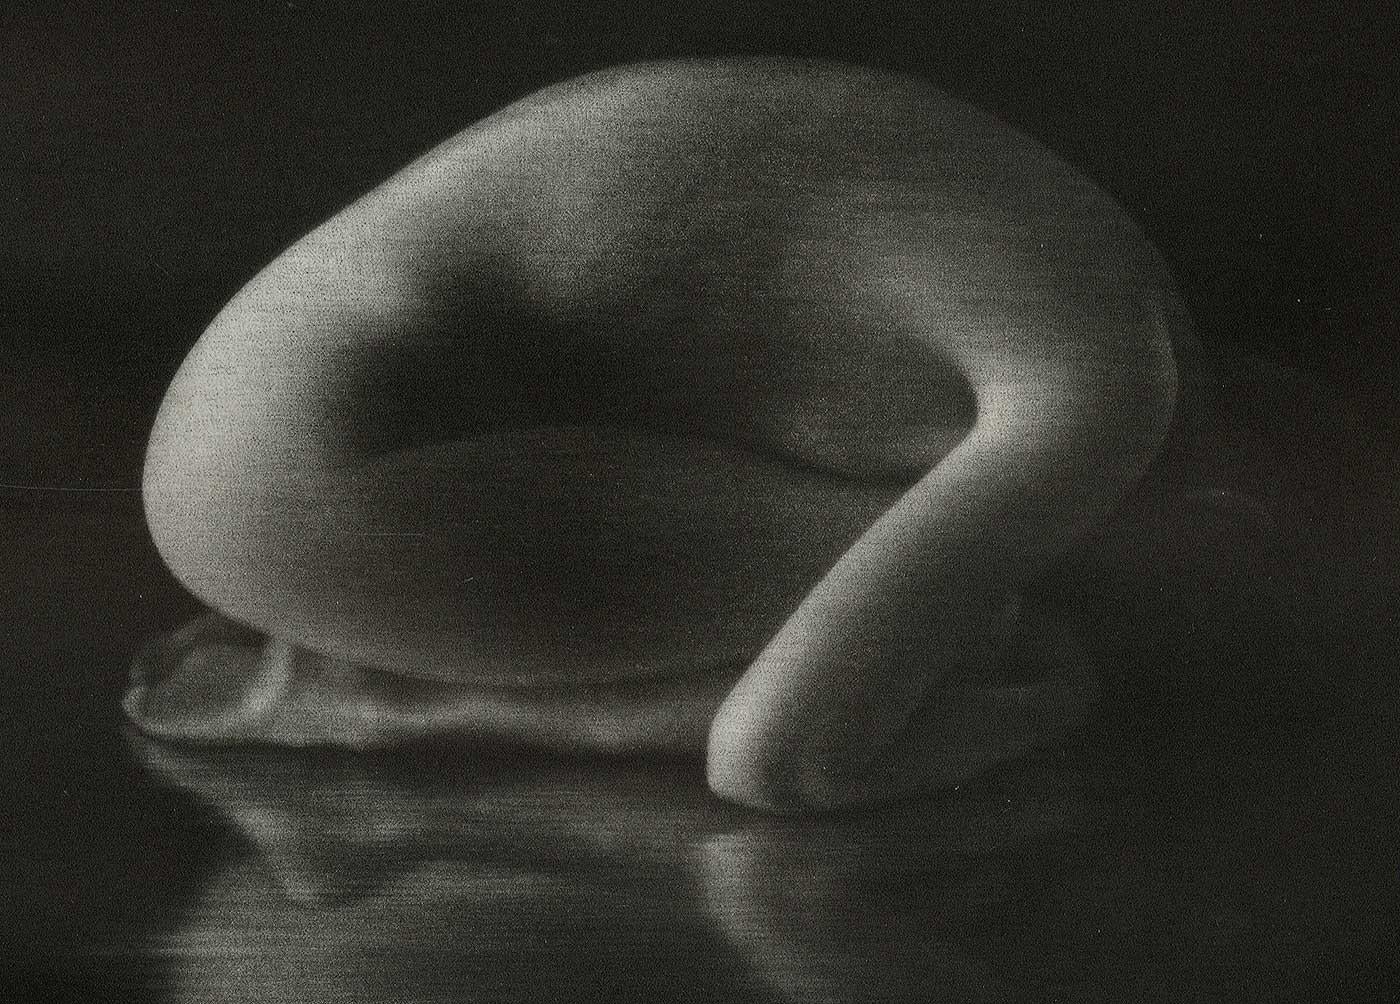 Espoir (Hope -- the expression of desire through high anticipation) - Print by Mikio Watanabe